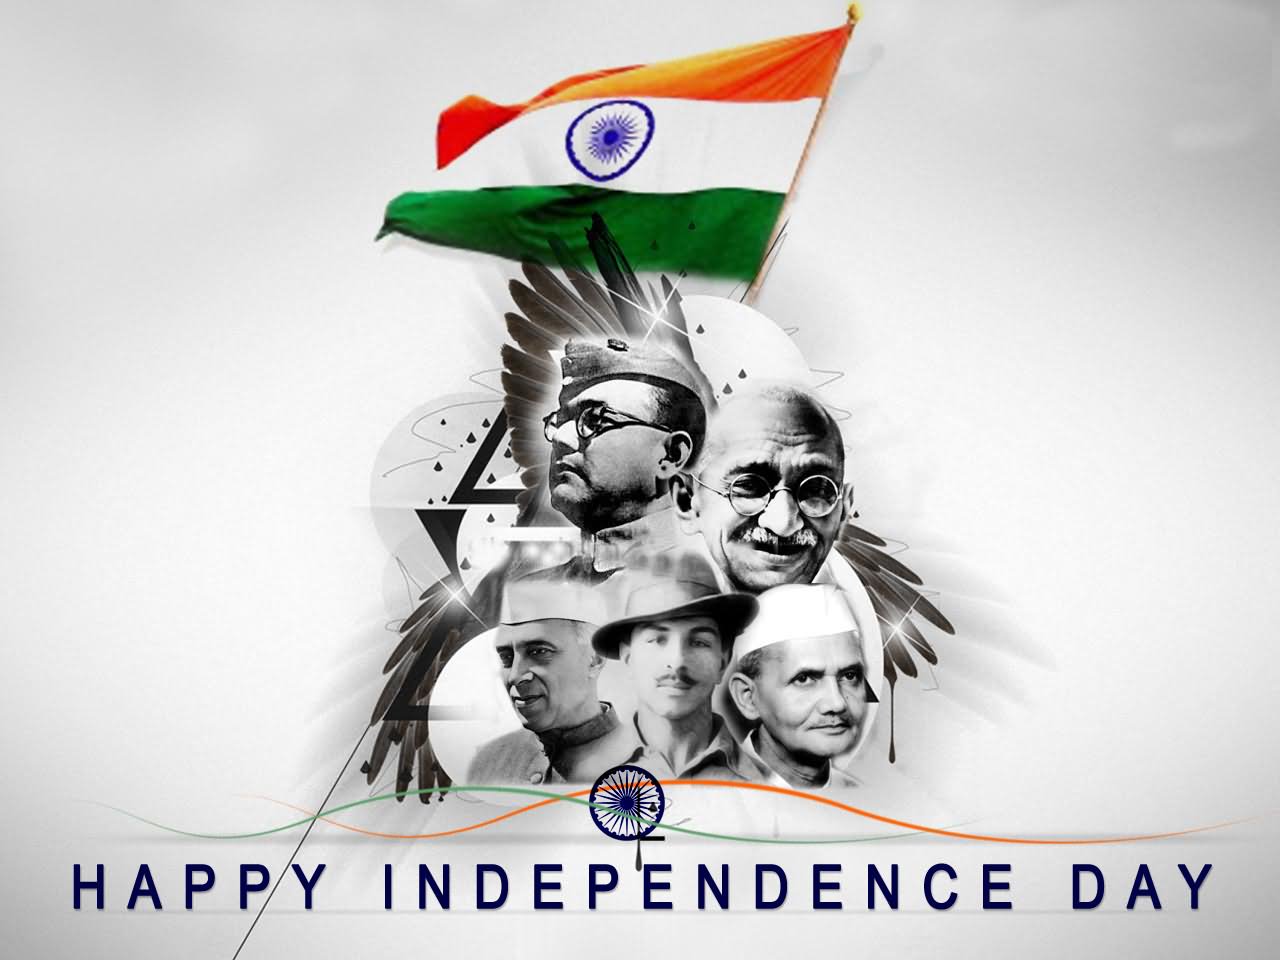 Happy Independence Day Freedom Fighters Of India